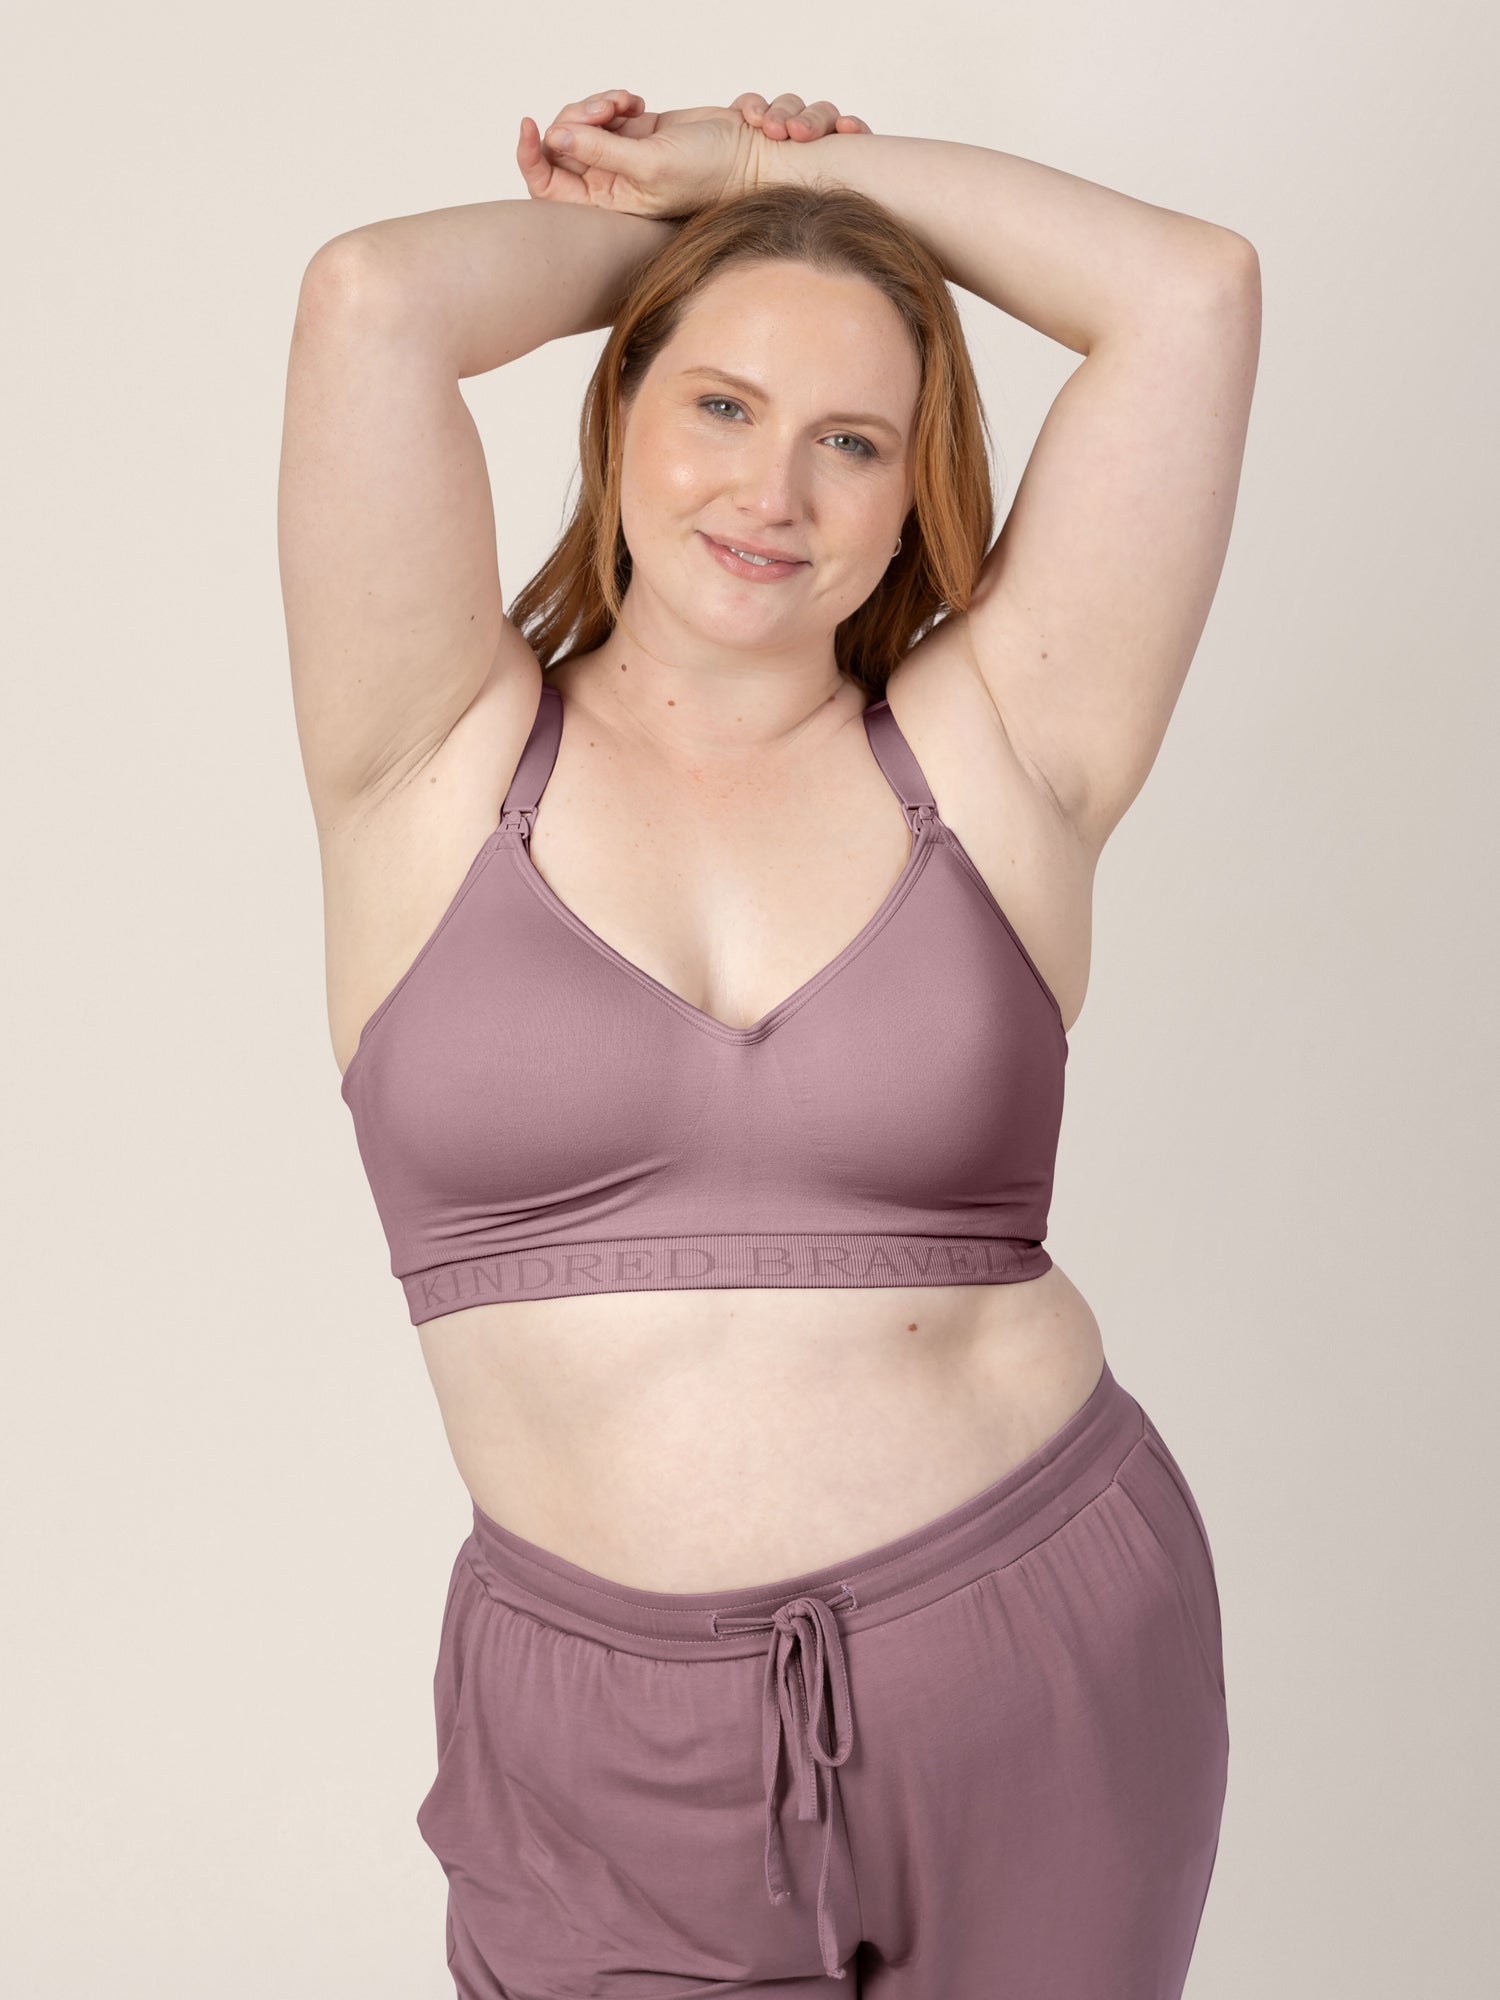 Busty model holding her hands over her head while wearing the Signature Sublime® Contour Maternity & Nursing Bra in Twilight@model_info:Ryn is wearing an X-Large Busty.